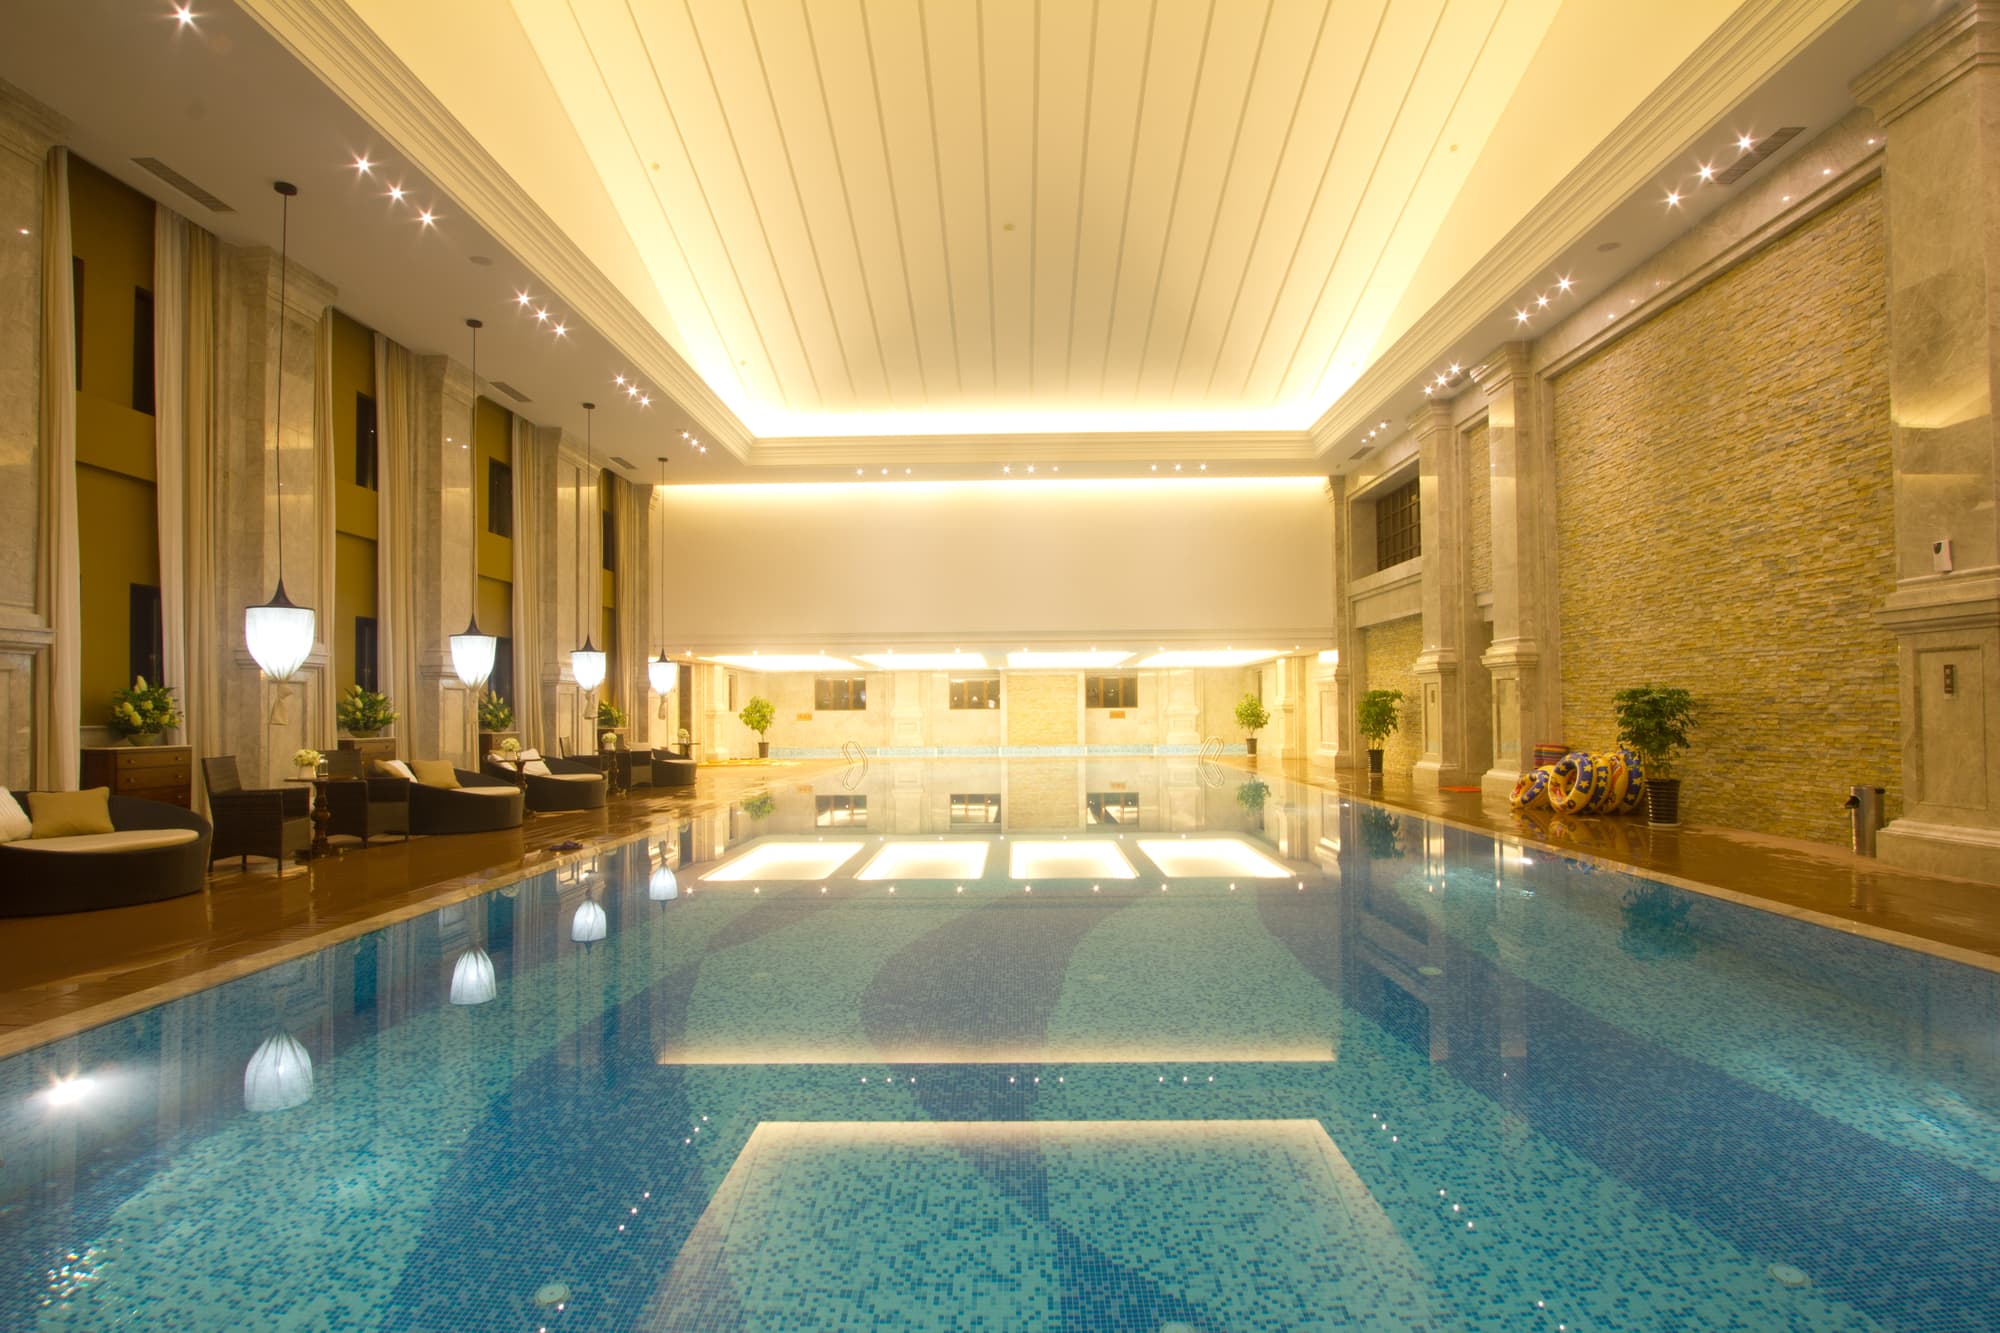 A luxurious indoor swimming pool with a large ceiling and a large stone wall.